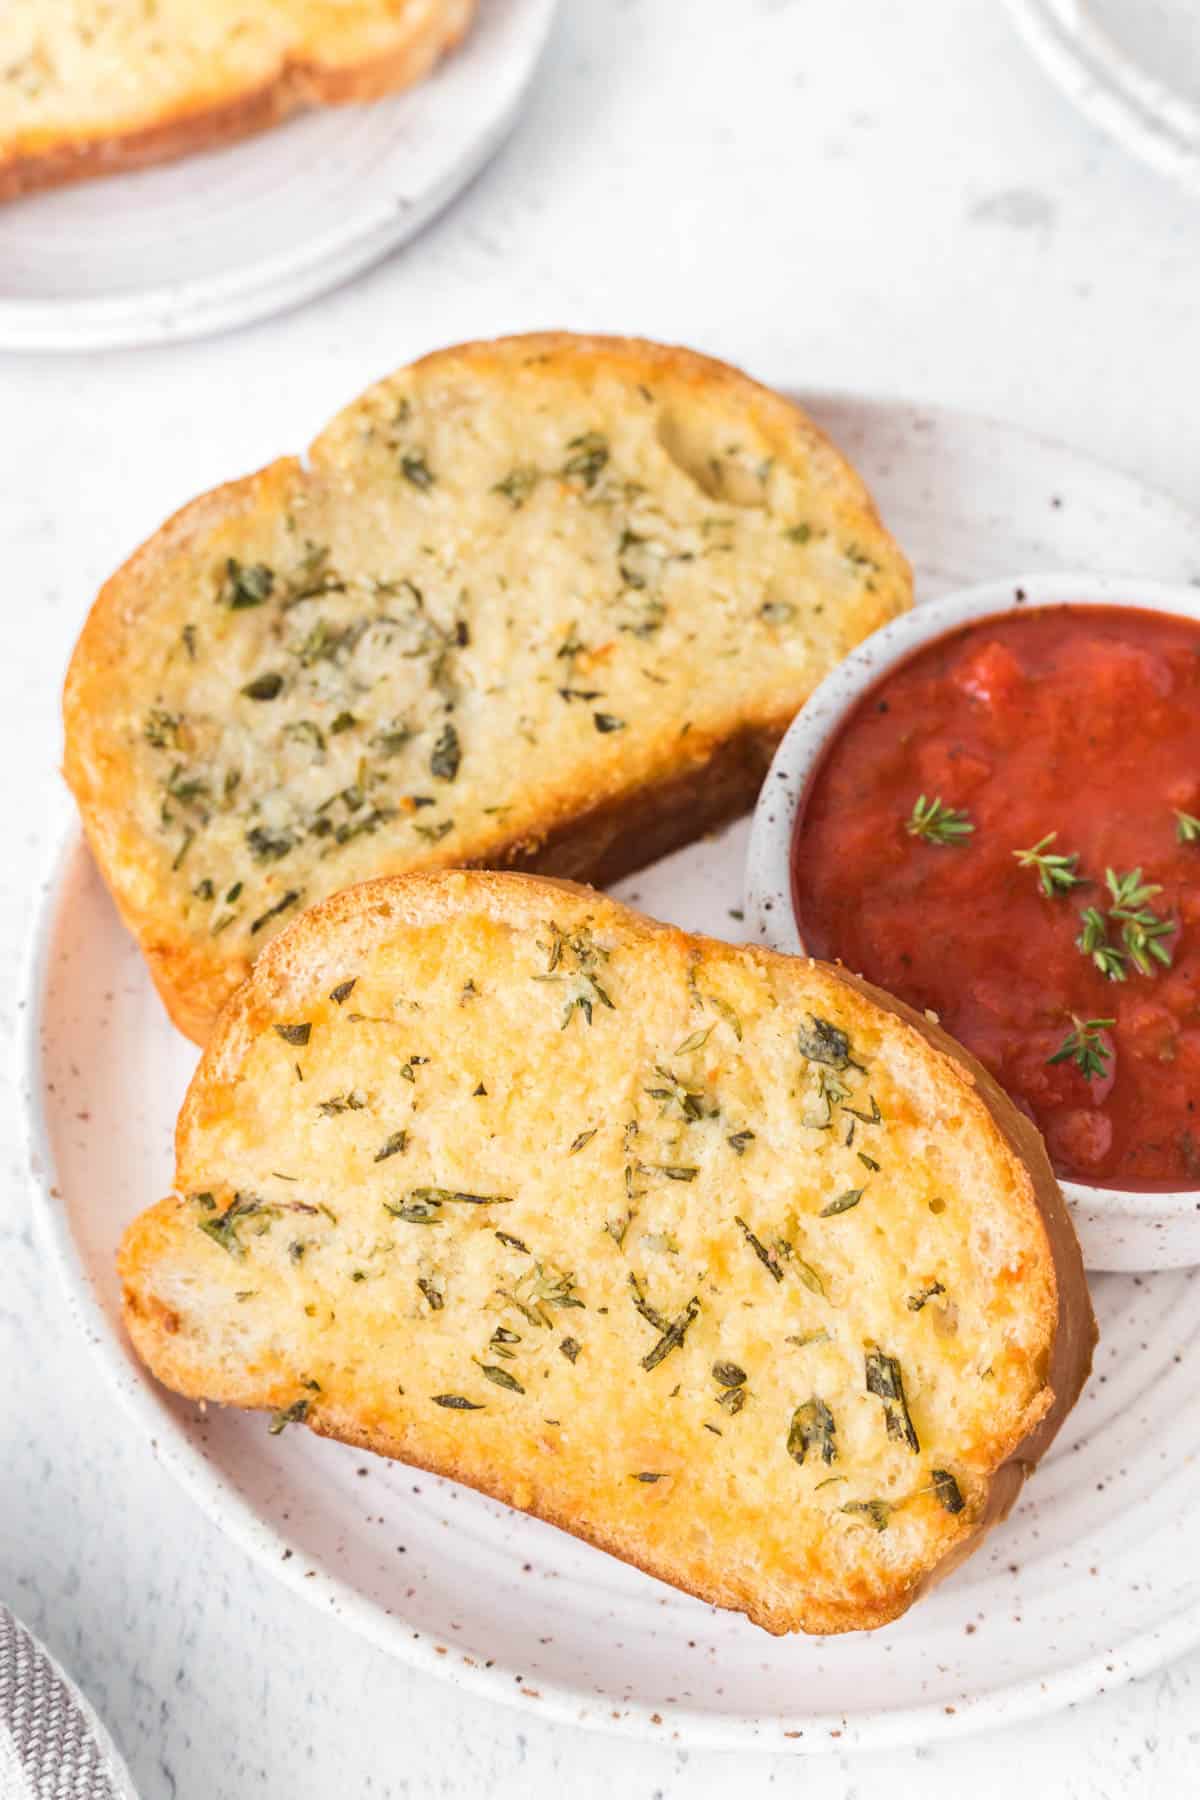 Garlic bread on a plate with a bowl of marinara sauce.